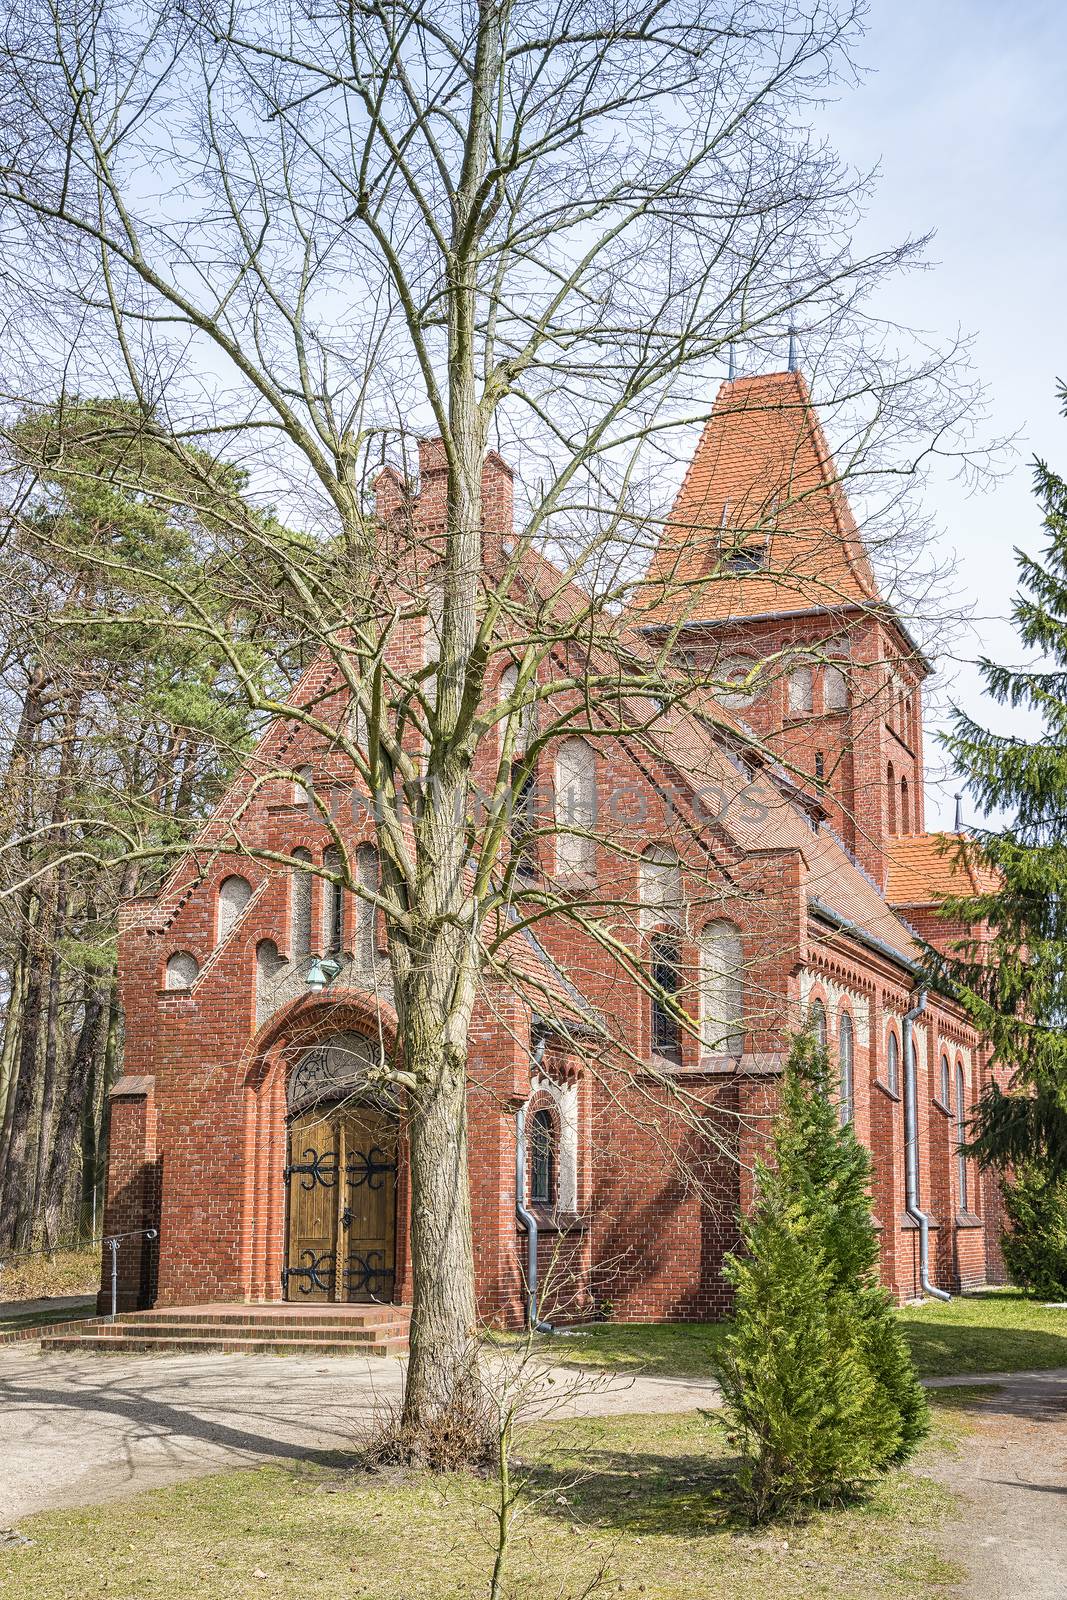 Picture of a typical church of red brick in Graal Muritz on the Baltic Sea, Germany